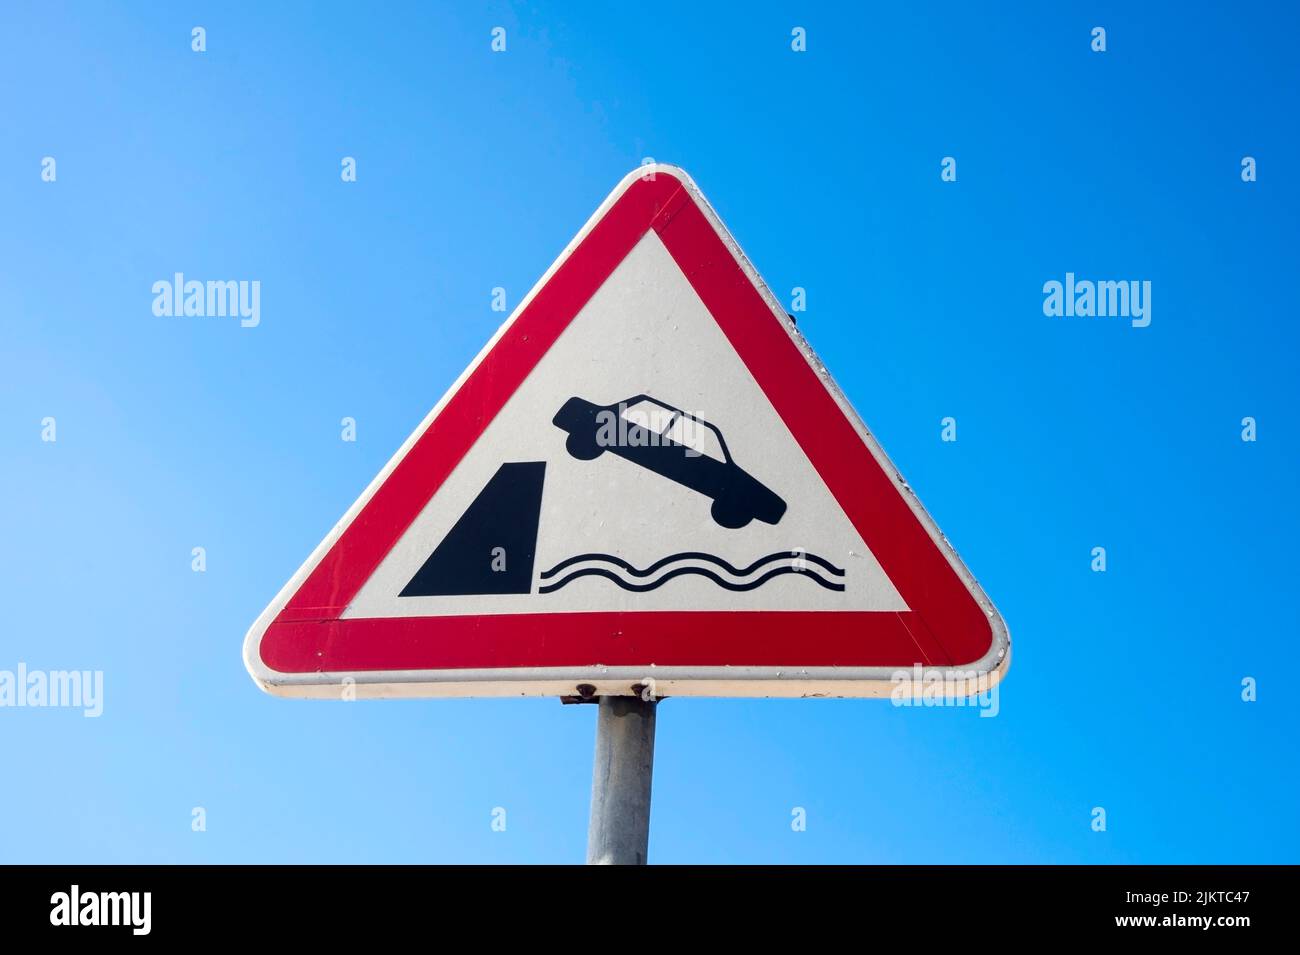 Car falling into water traffic sign Stock Photo